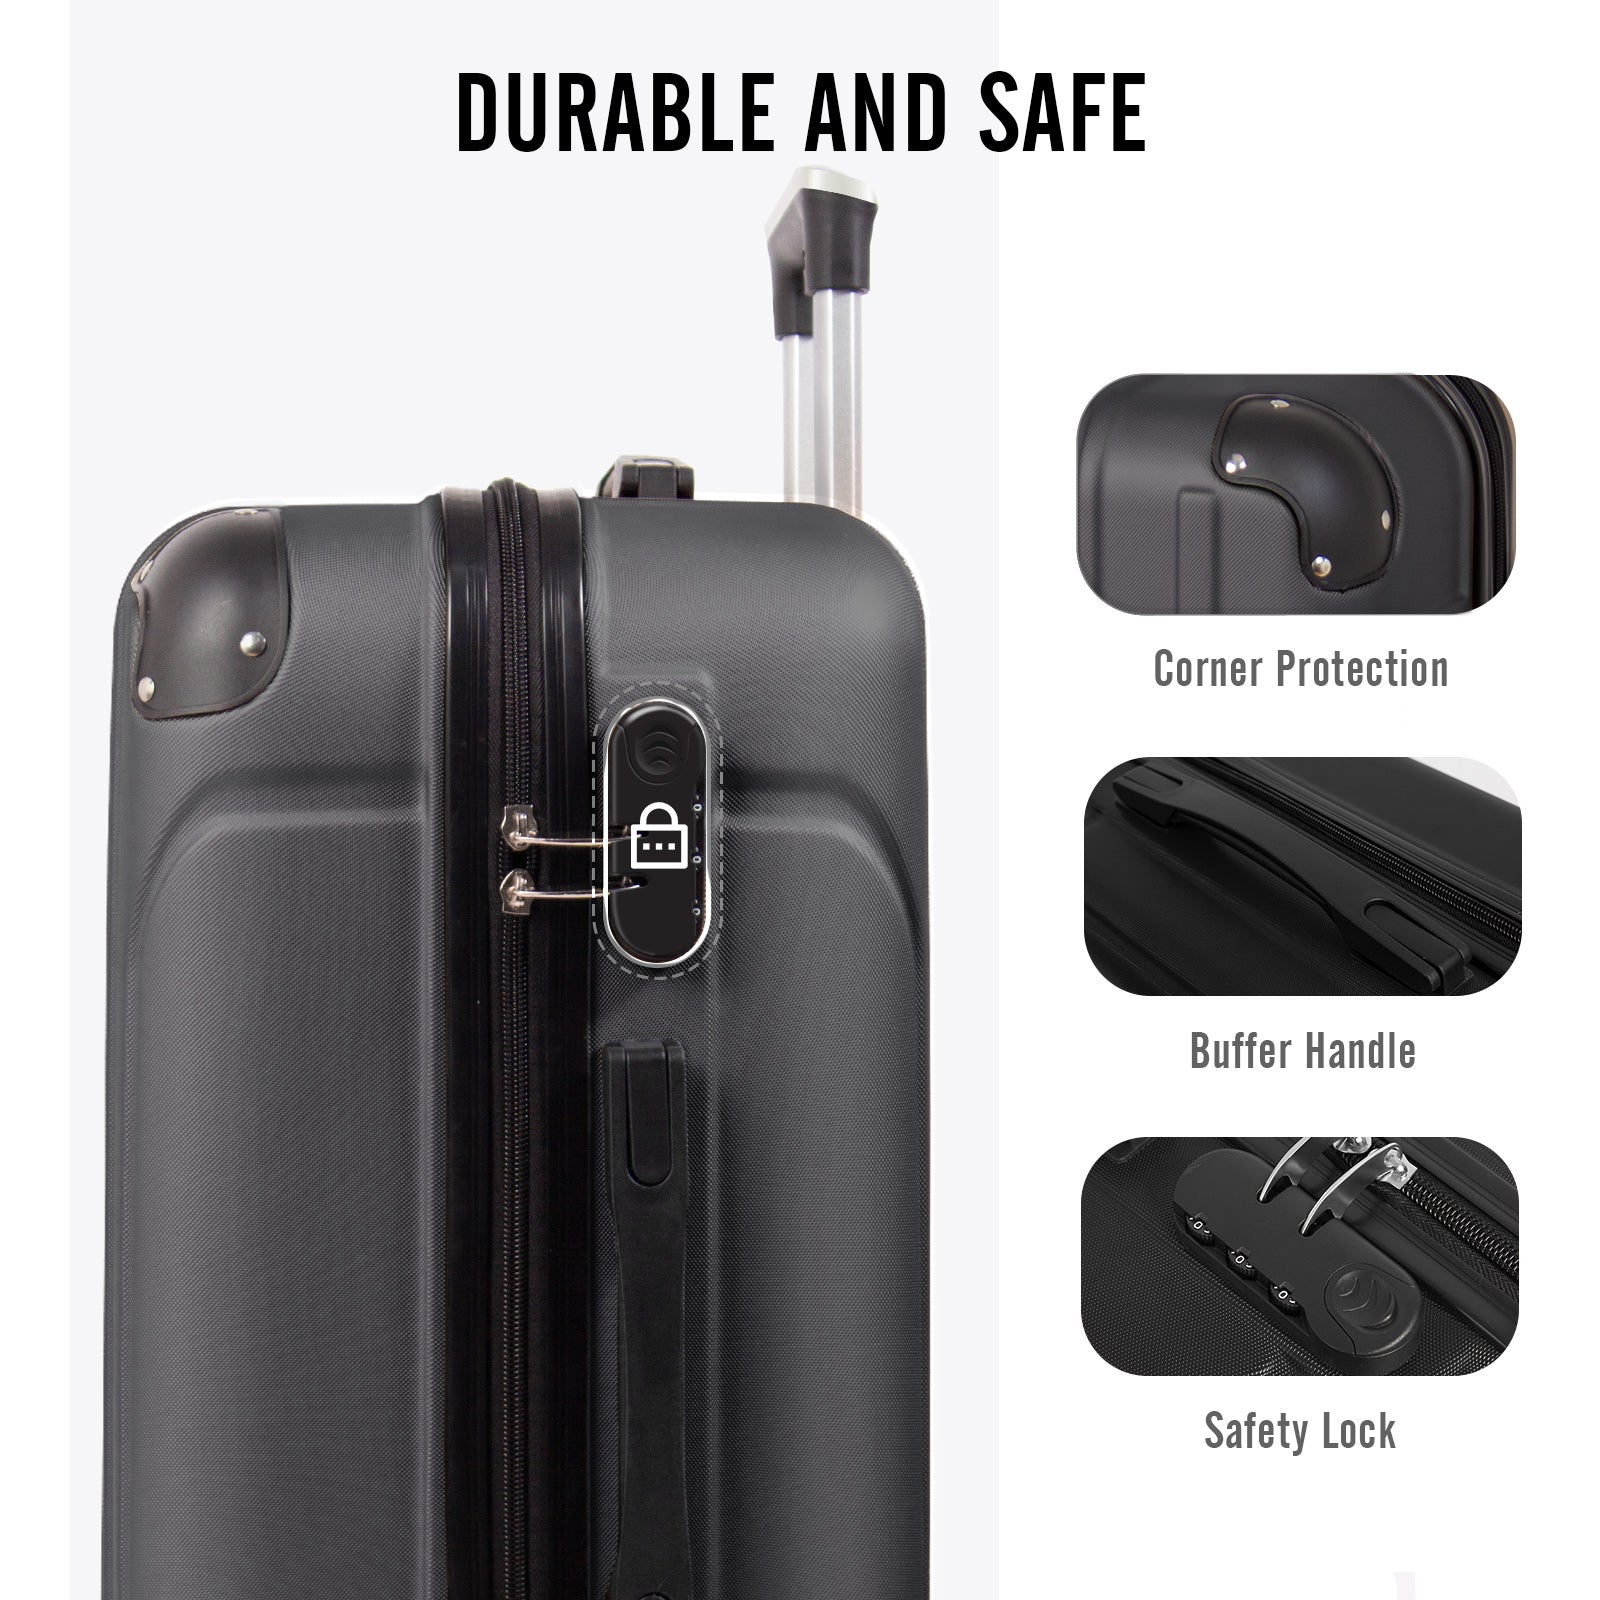 Todeco-Medium-Suitcase-Size-68cm-Travel-Suitcase-Rigid-and-Lightweight-ABS-Travel-Suitcase-with-Wheels-Suitcases-4-Double-Wheels-68x45x26cm-Anthracite-Gray-Medium-Suitcase-Size-68cm-Anthracite-Gray